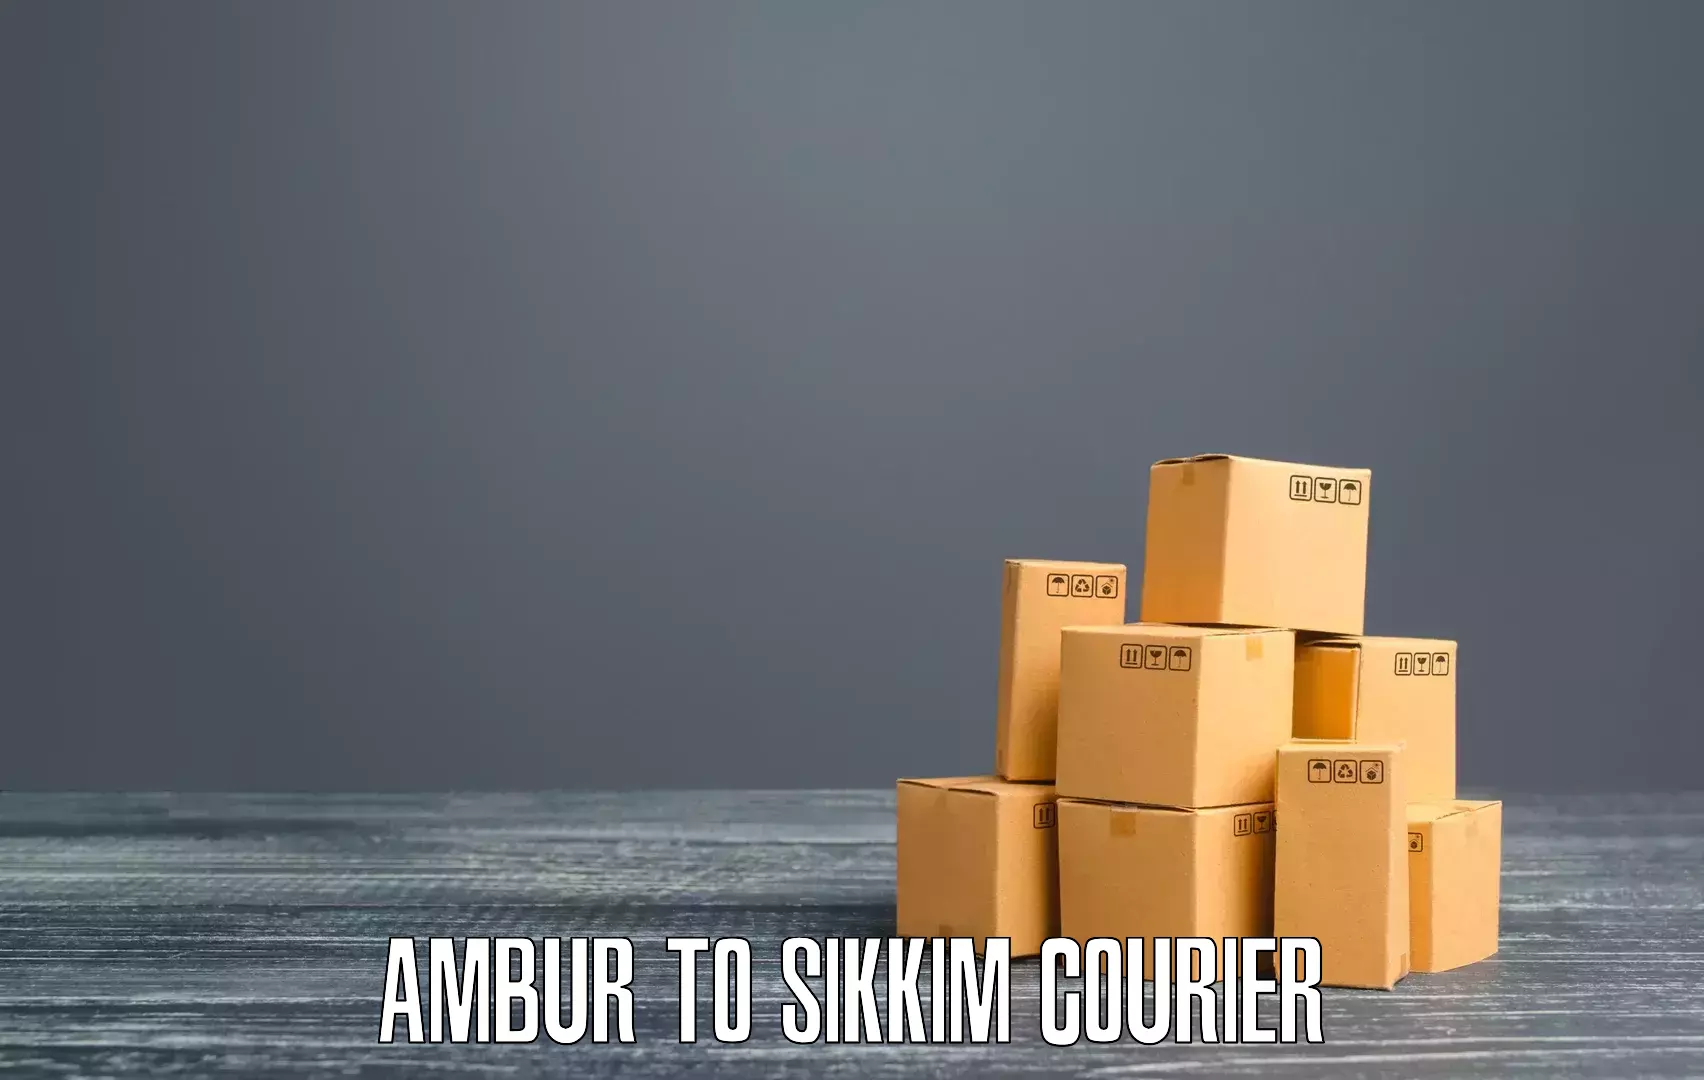 Courier tracking online Ambur to Pelling